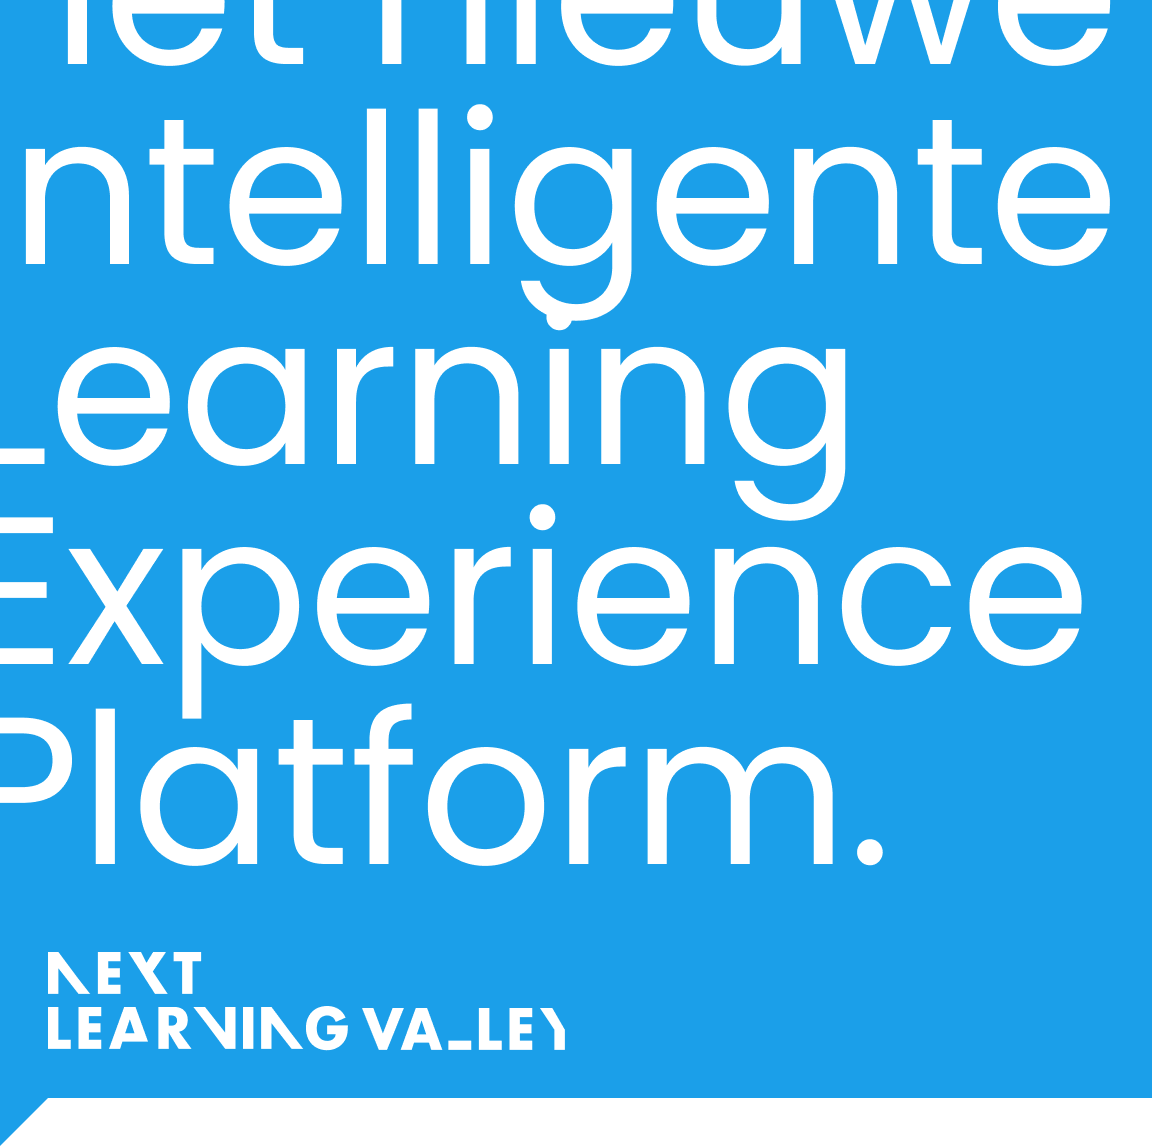 Next Learning Valley